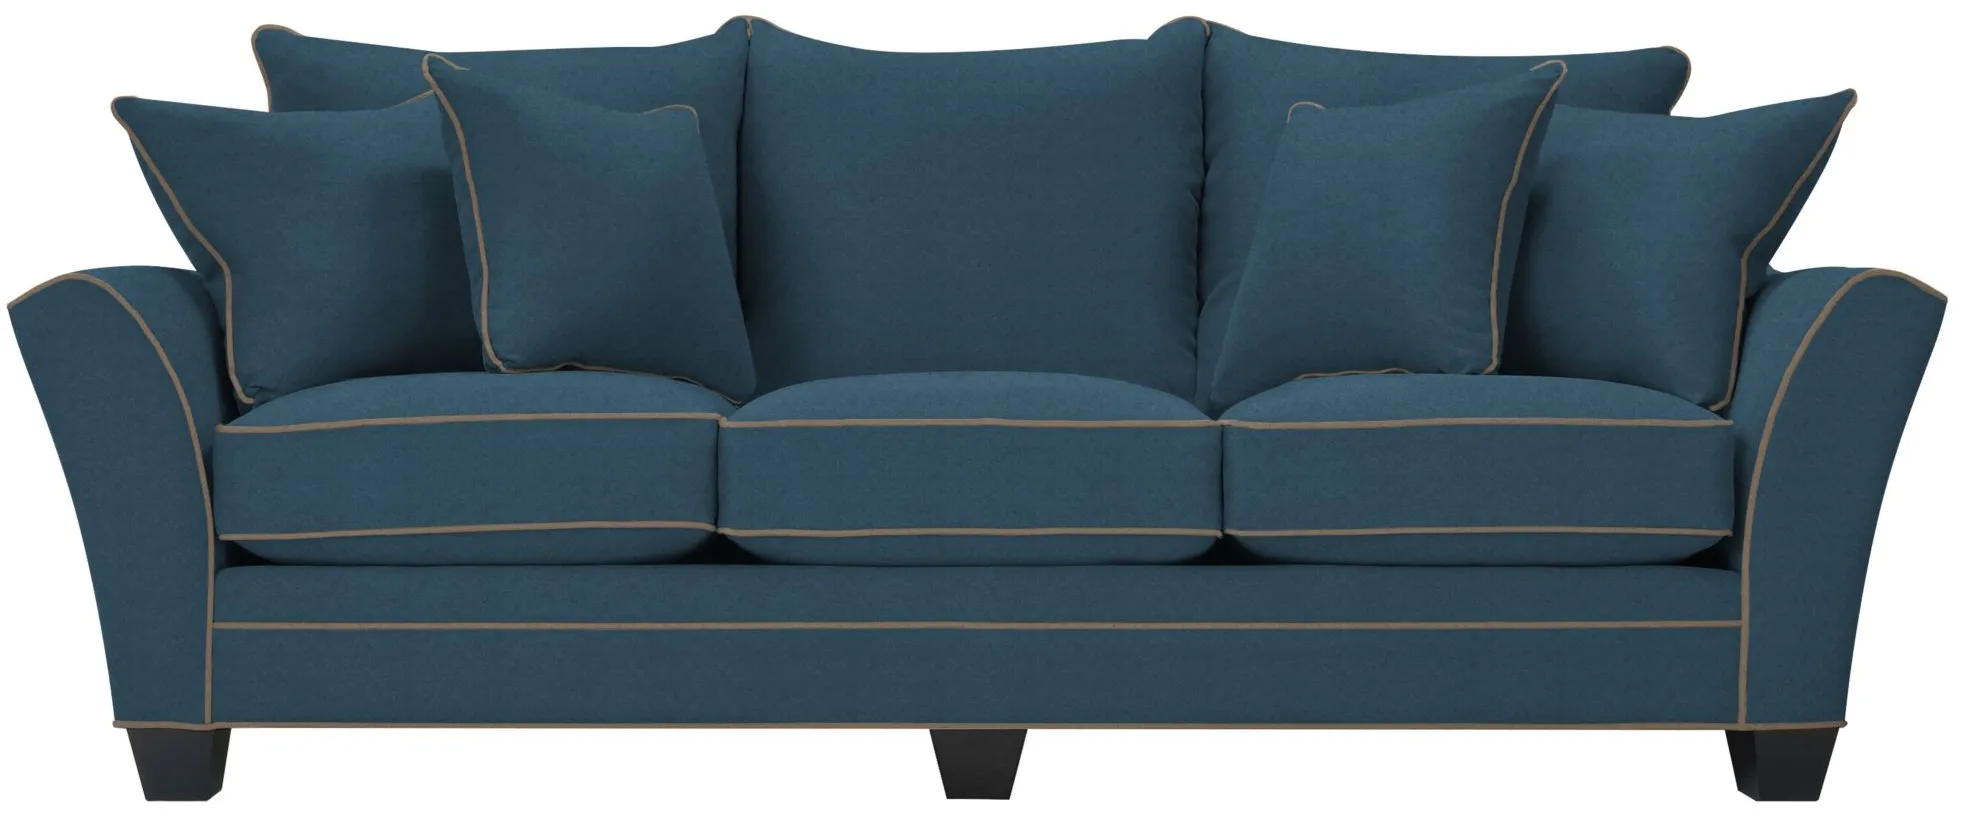 Briarwood Queen Plus Sleeper Sofa in Suede So Soft Indigo/Mineral by H.M. Richards